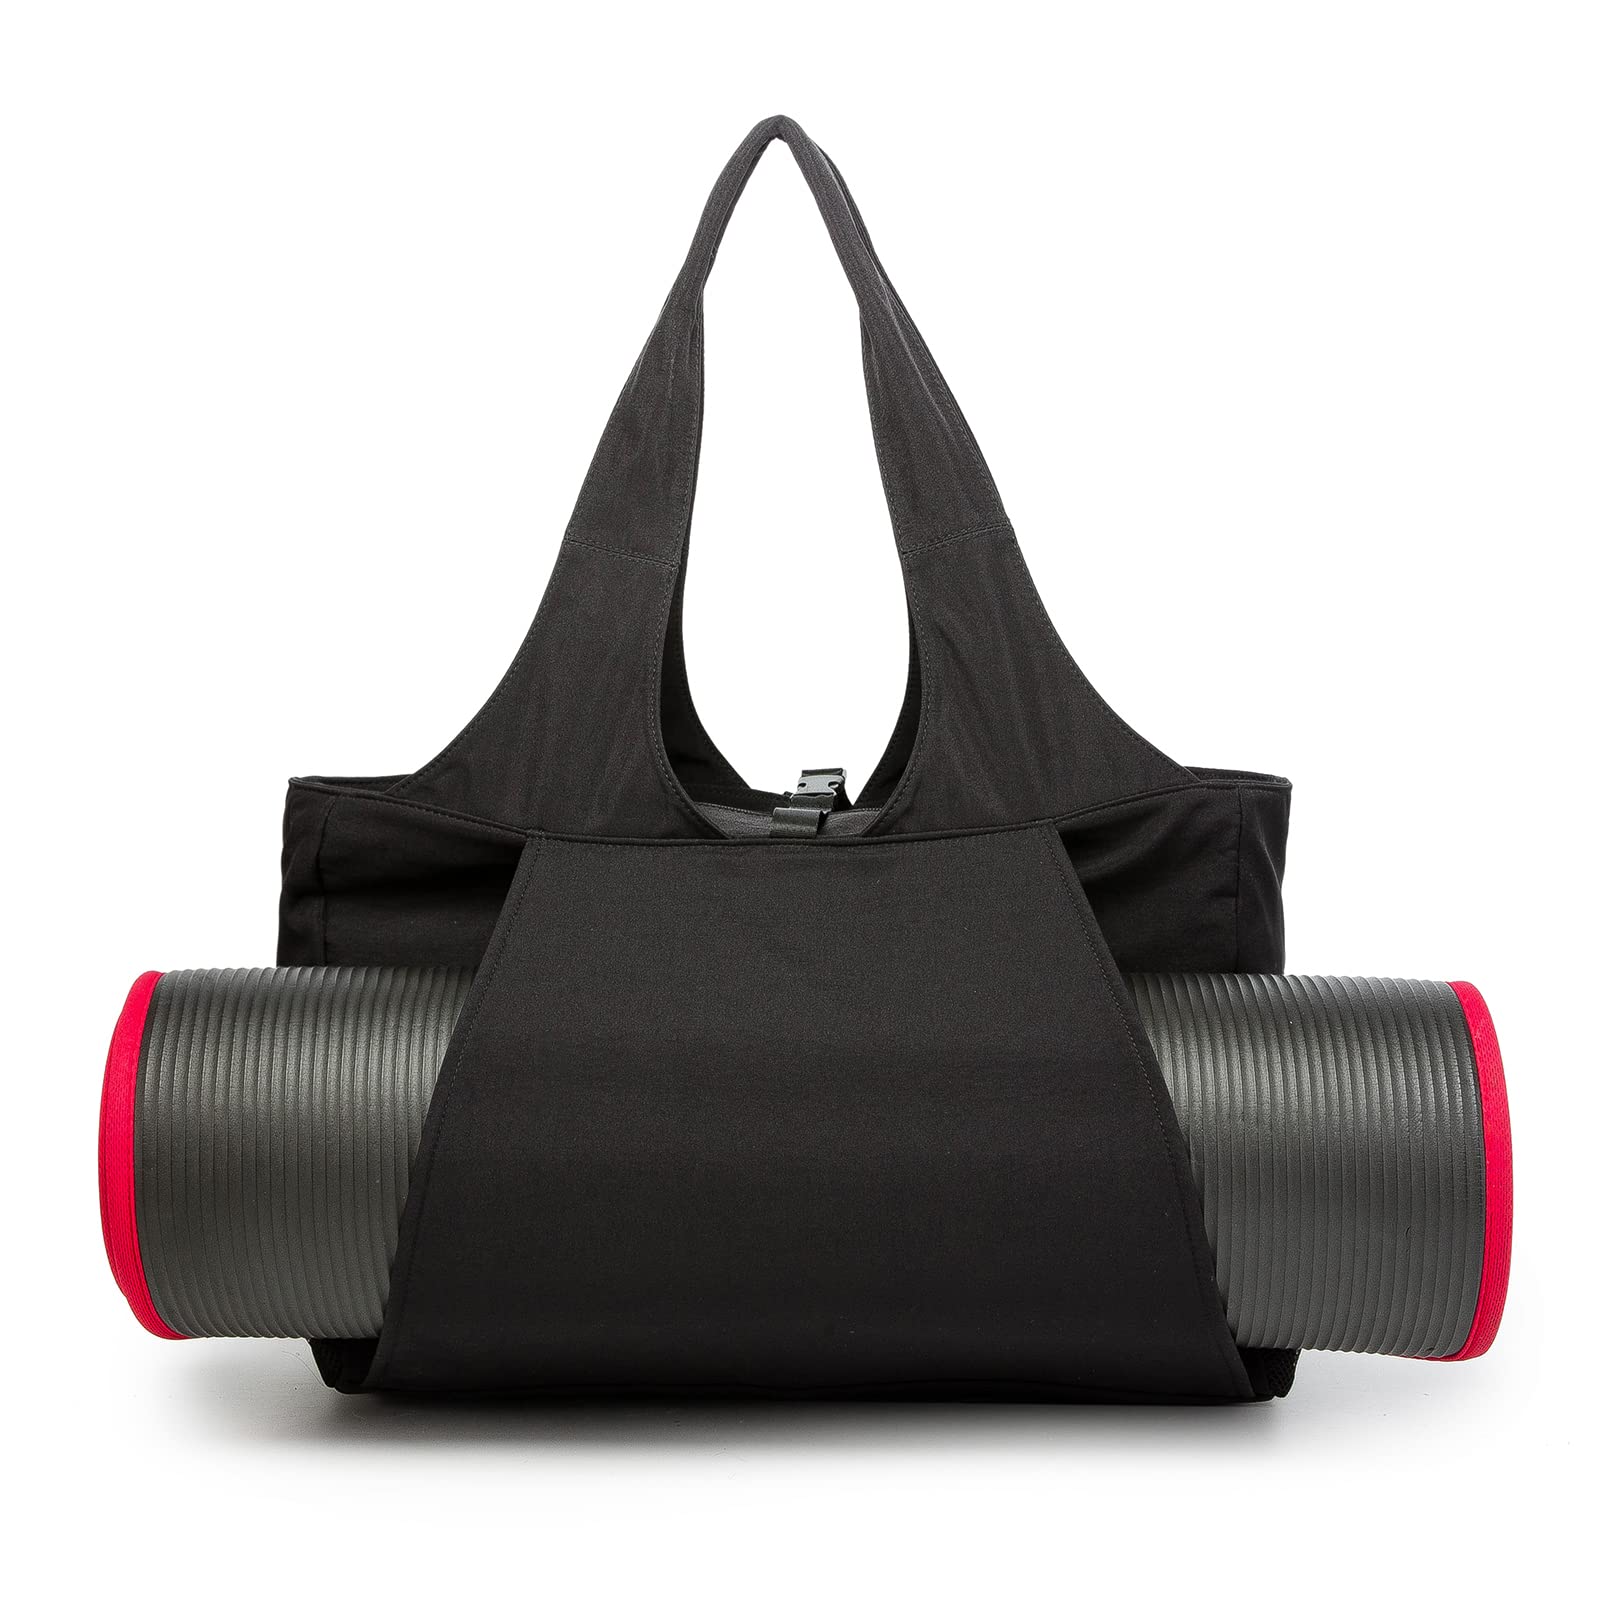  Yoga Mat Bag-Yoga Tote Bag w/Clips-Wipeable Yoga Bags and  Carriers Fits All Your Stuff-Gym Bag with Yoga Mat Holder-Travel w/Yoga Mat  Bags for Women : Sports & Outdoors